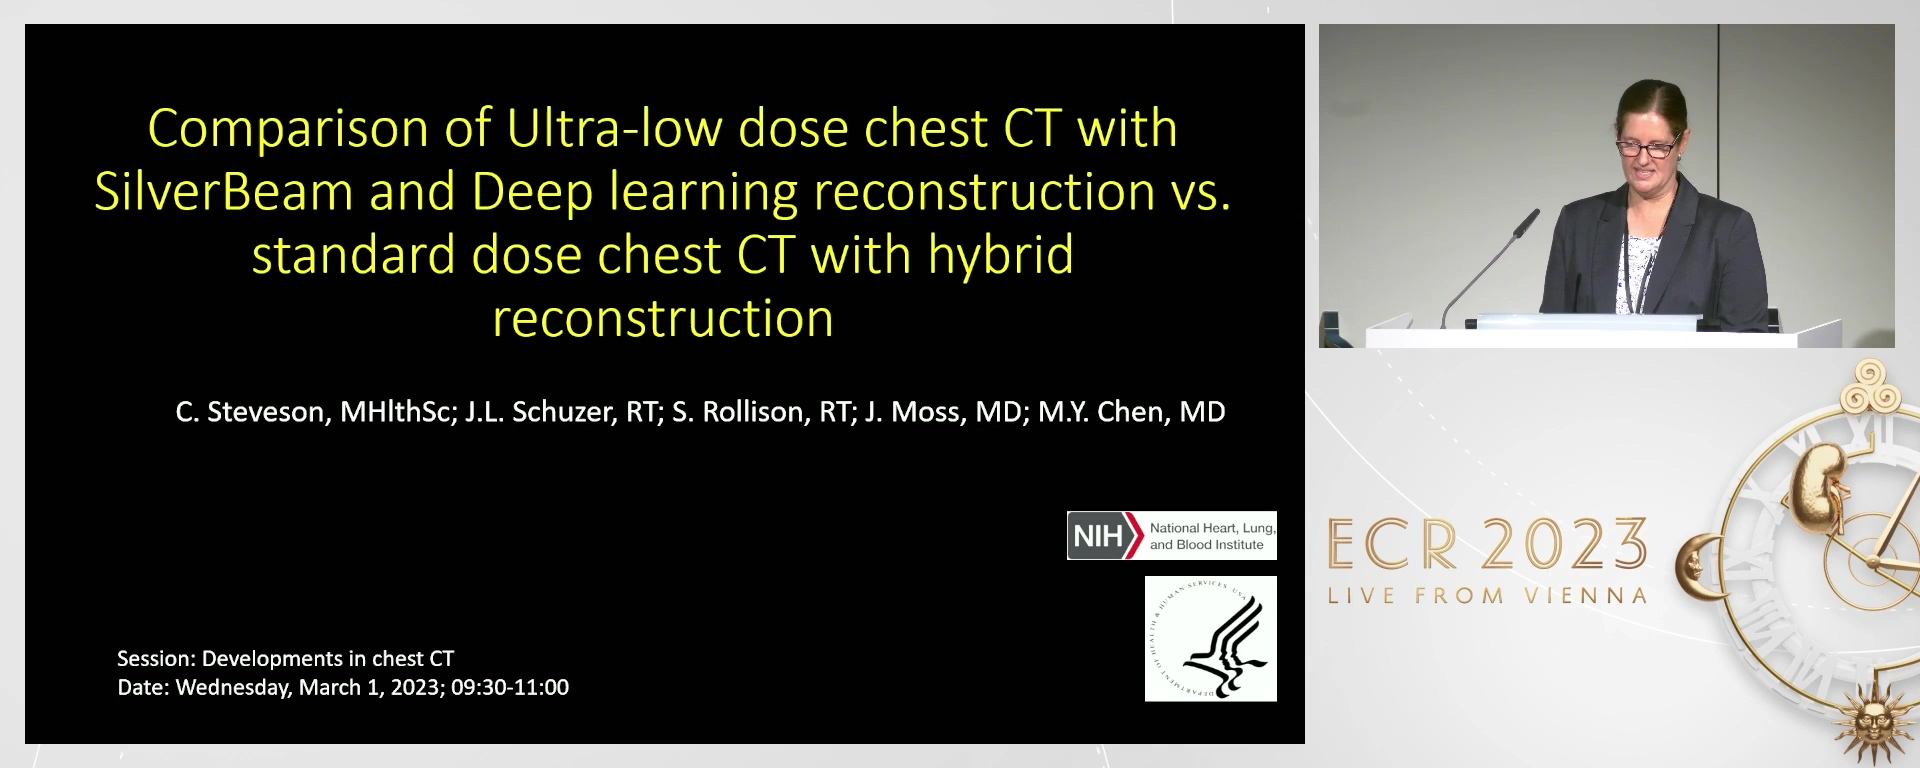 Comparison of ultra-low dose chest CT with SilverBeam and deep learning reconstruction vs. standard dose chest CT with hybrid reconstruction - Chloe Steveson, Adelaide / AU